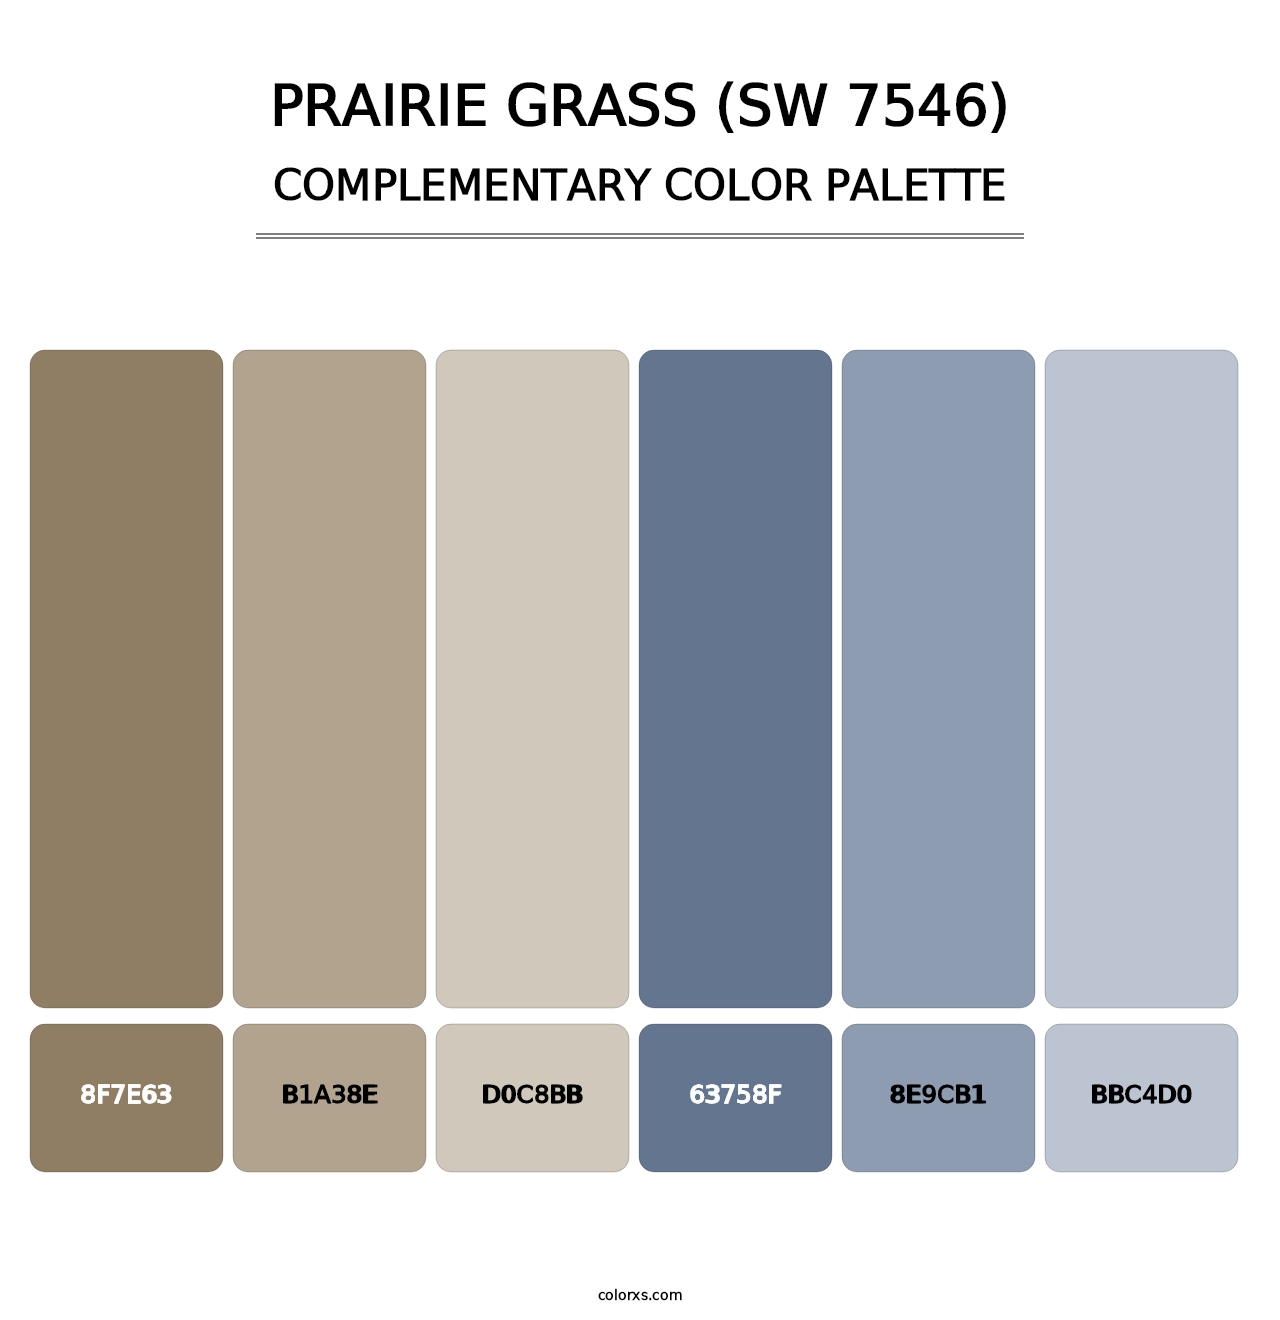 Prairie Grass (SW 7546) - Complementary Color Palette